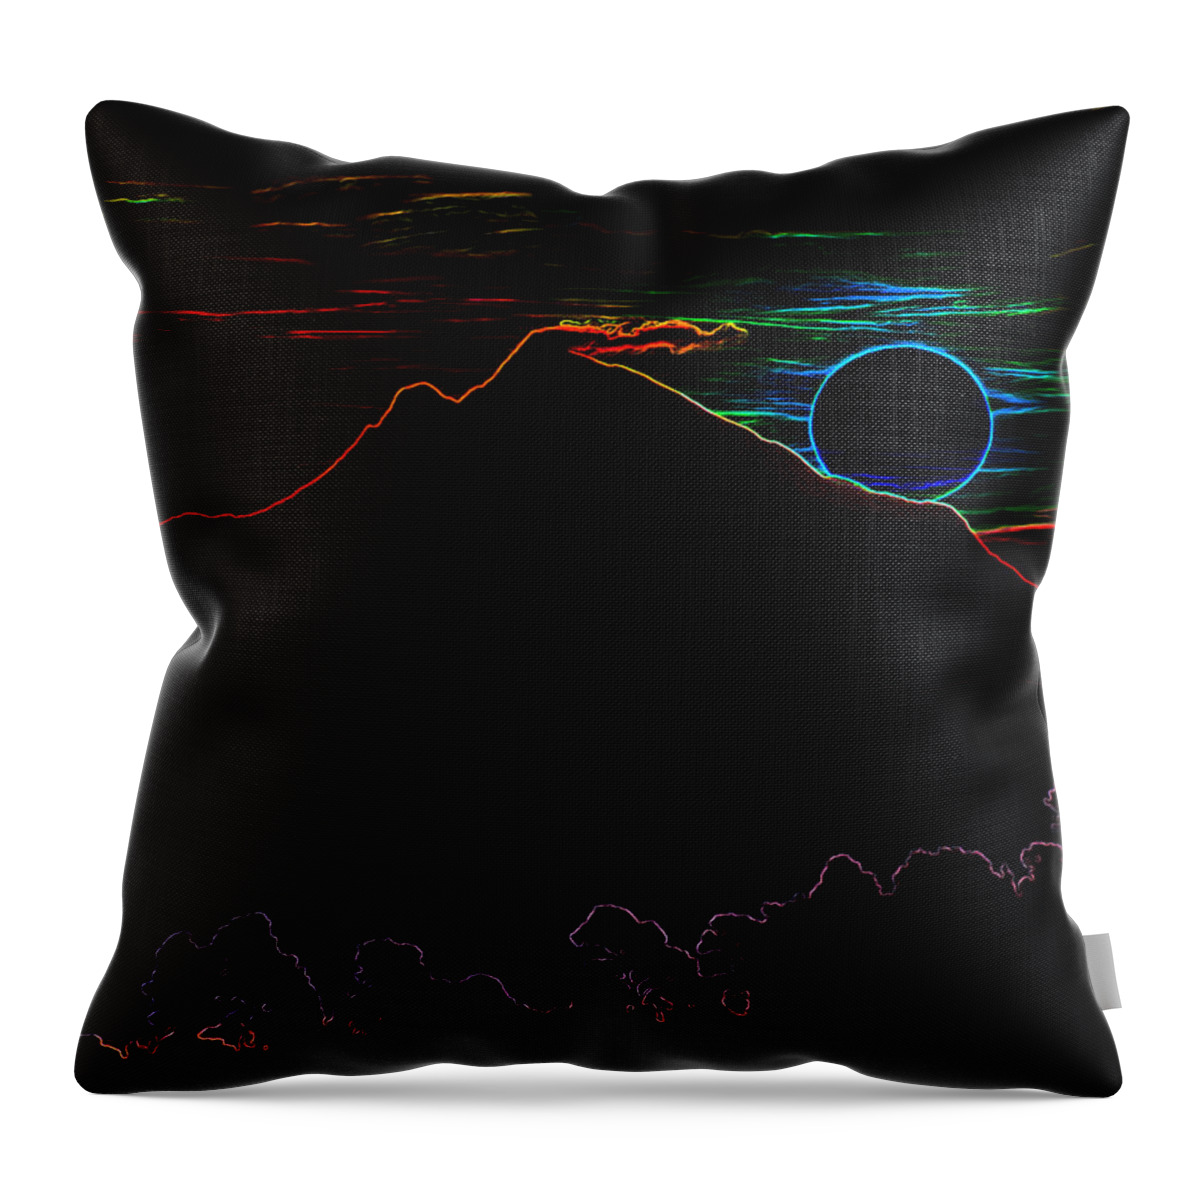 Greece Throw Pillow featuring the digital art Psychedelic Sun Rise by Roy Pedersen